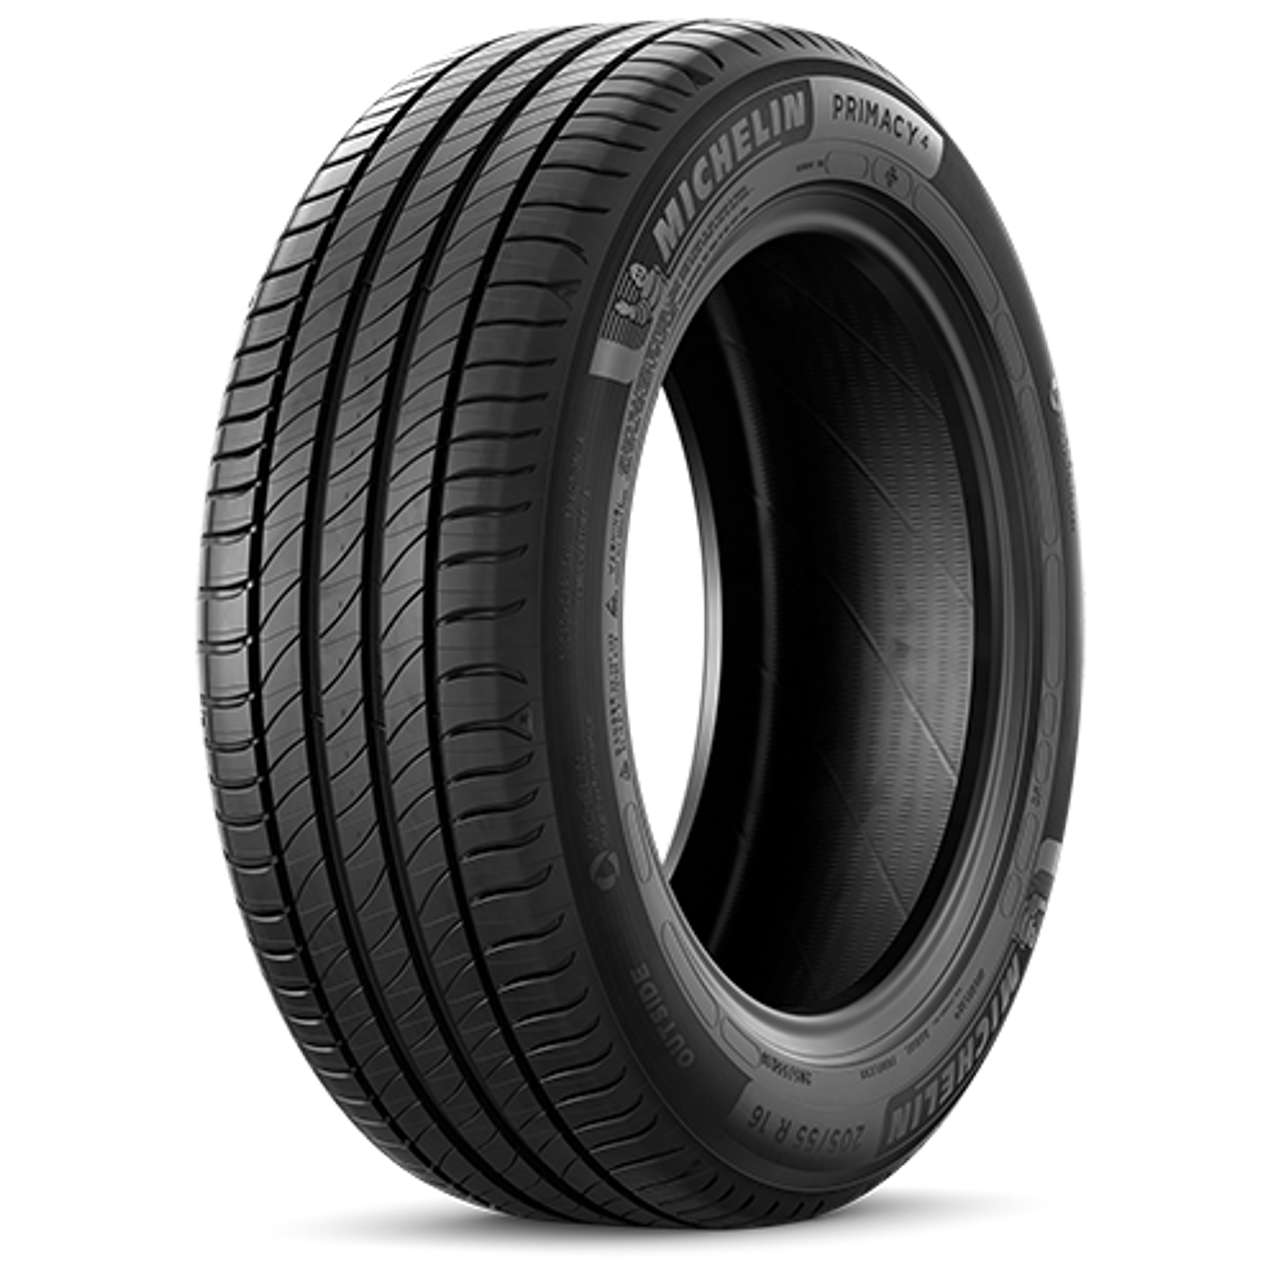 MICHELIN PRIMACY 4+ 235/50R18 101Y BSW